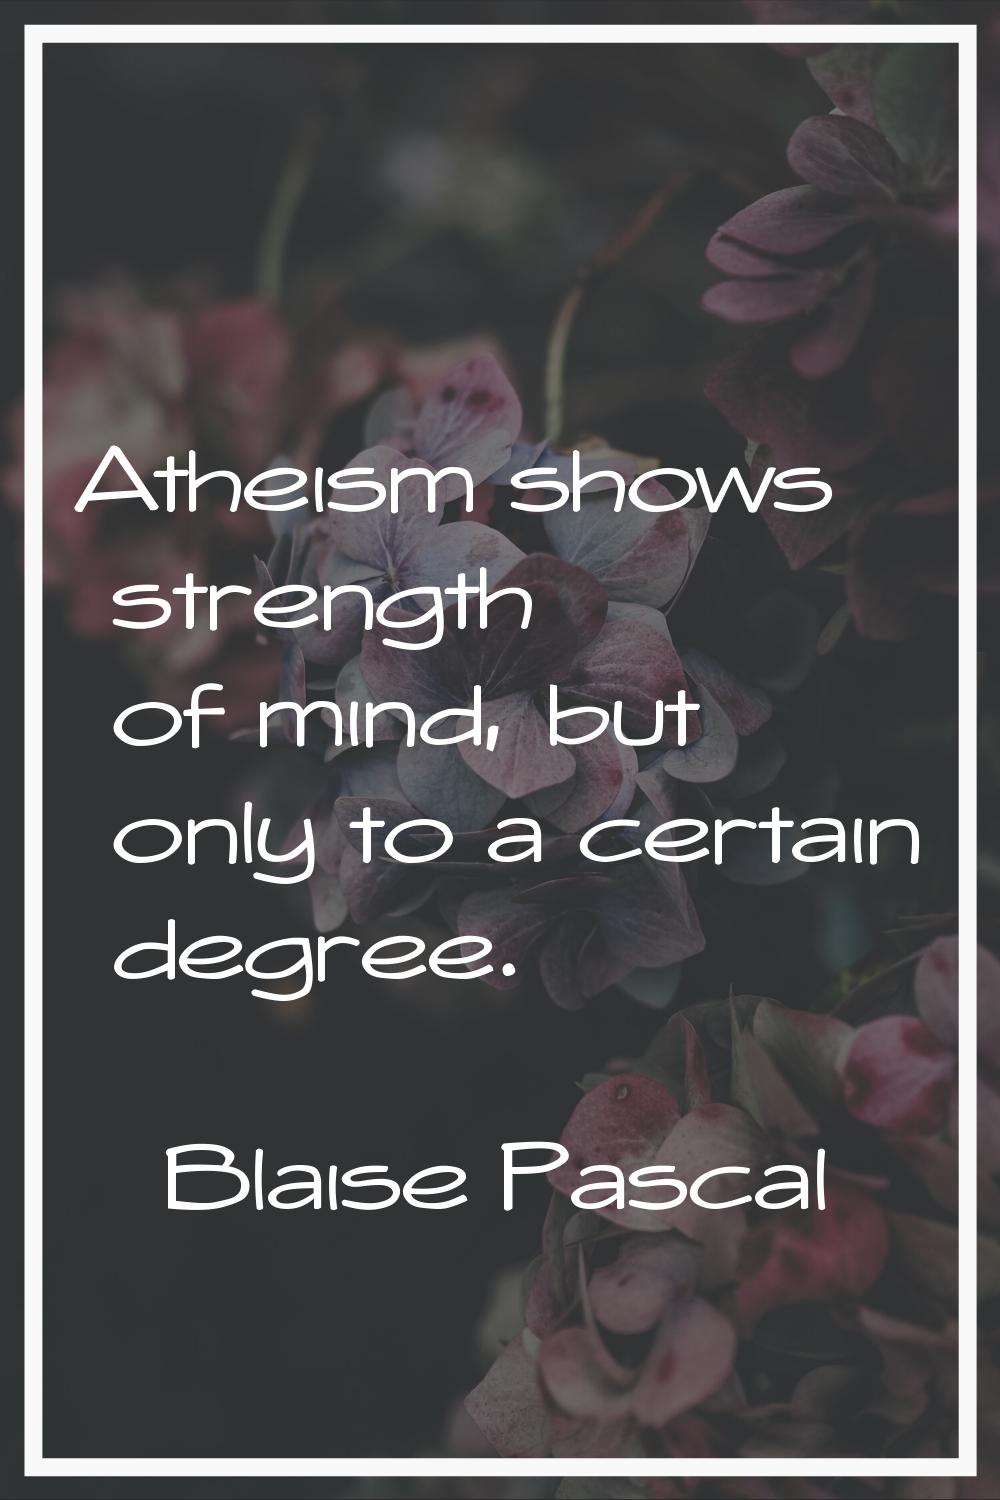 Atheism shows strength of mind, but only to a certain degree.